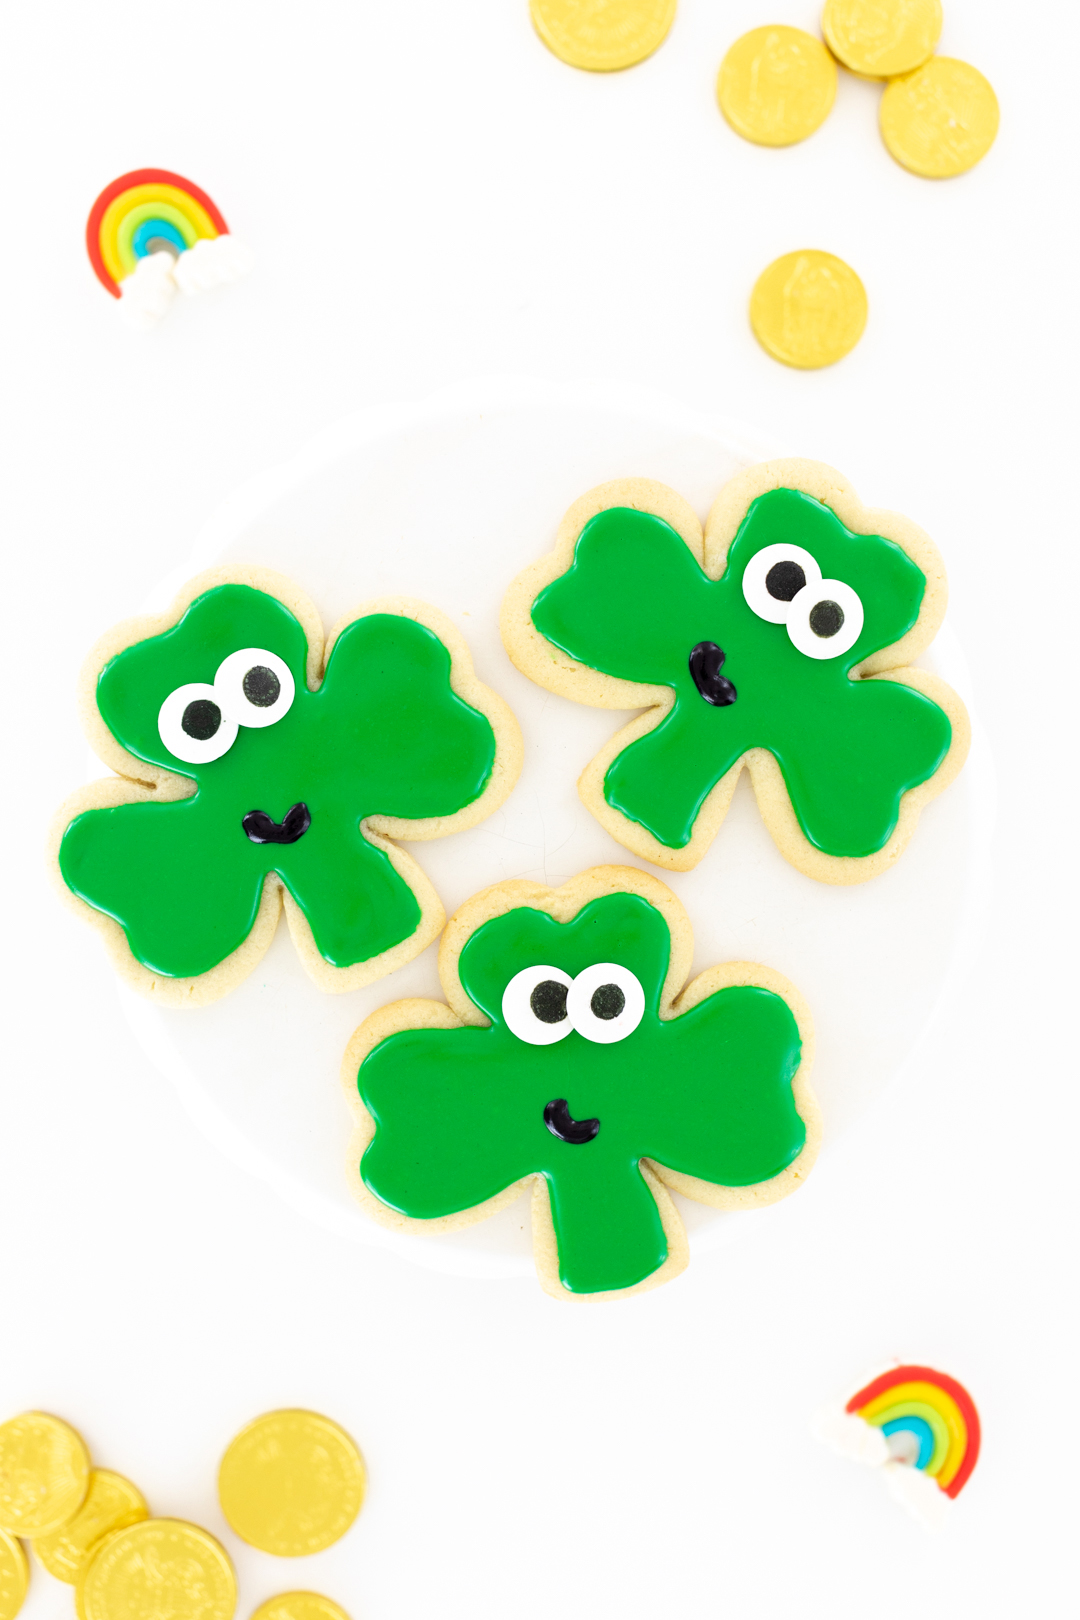 shamrock cookies with big eyes and tiny smiles for st. patrick's day